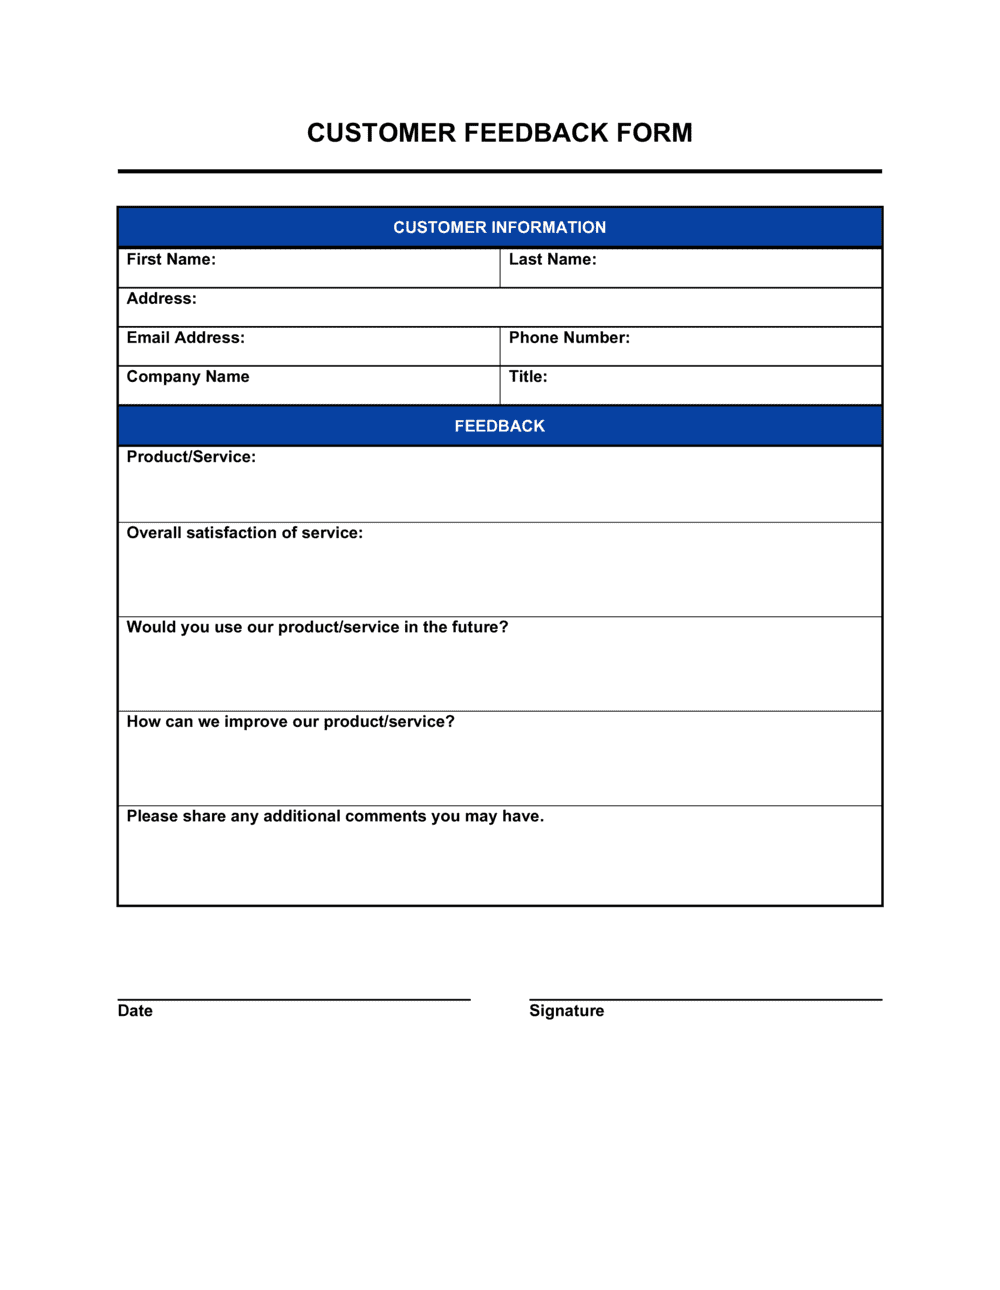 Customer Feedback Form Template | by Business-in-a-Box™